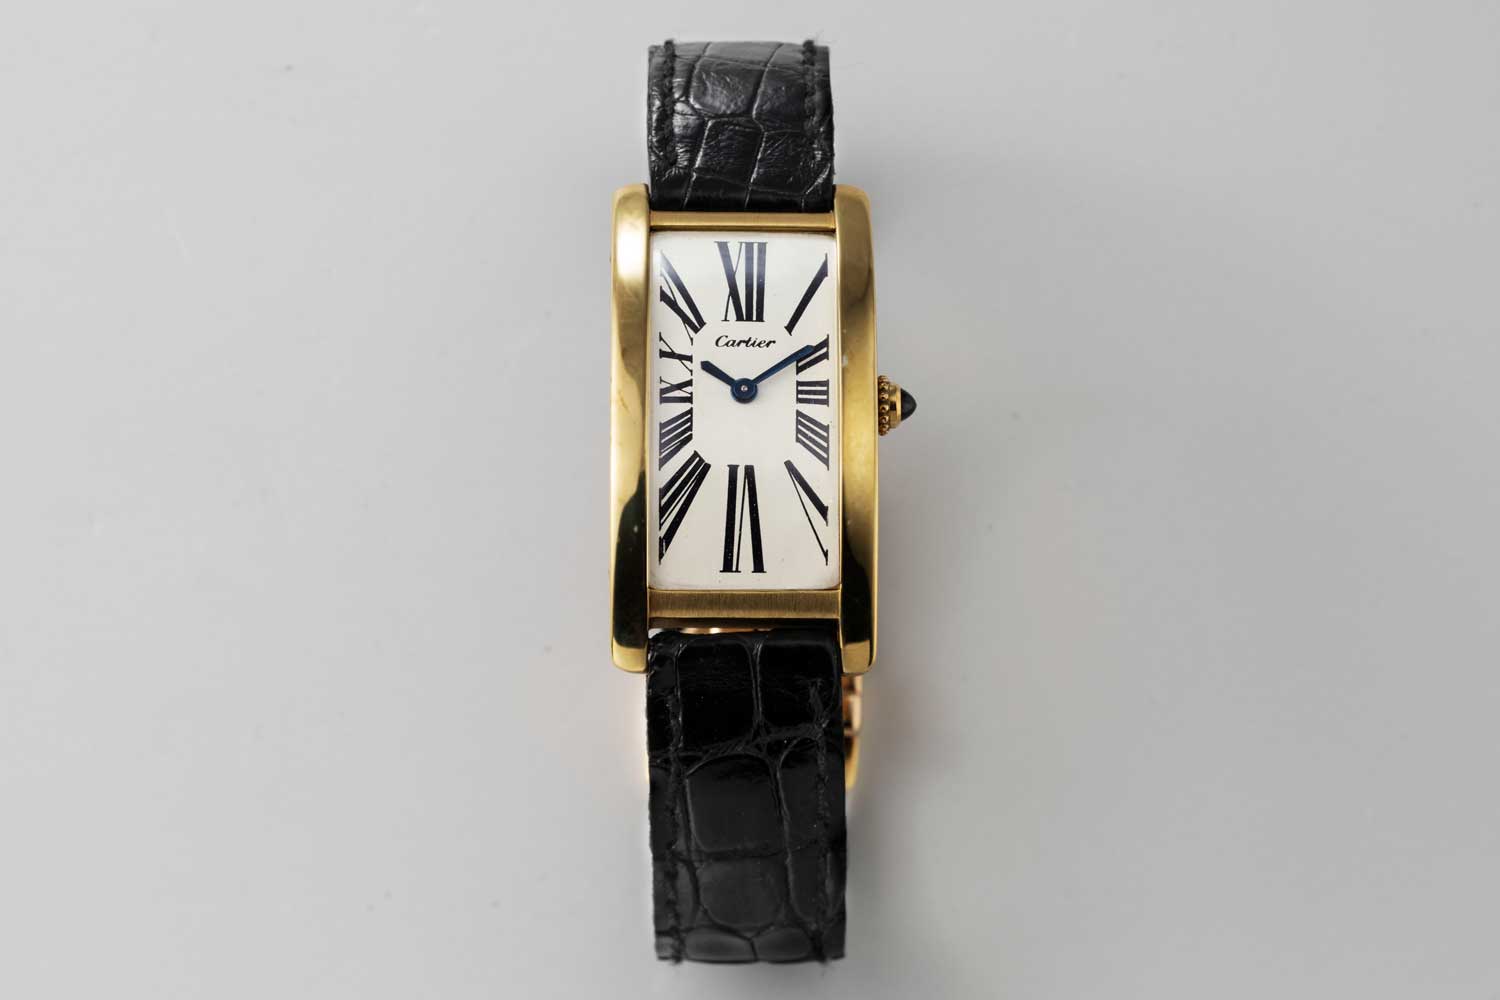 A 9-lignes, 1969 London Cartier Tank Cintrée; dial of the watch has a design which features serif Roman numerals that almost seem to explode from the center of the dial and reach for the edge of the case with a thrilling vibrancy; this particular example is from the private collection of Auro Montanari (©Revolution)